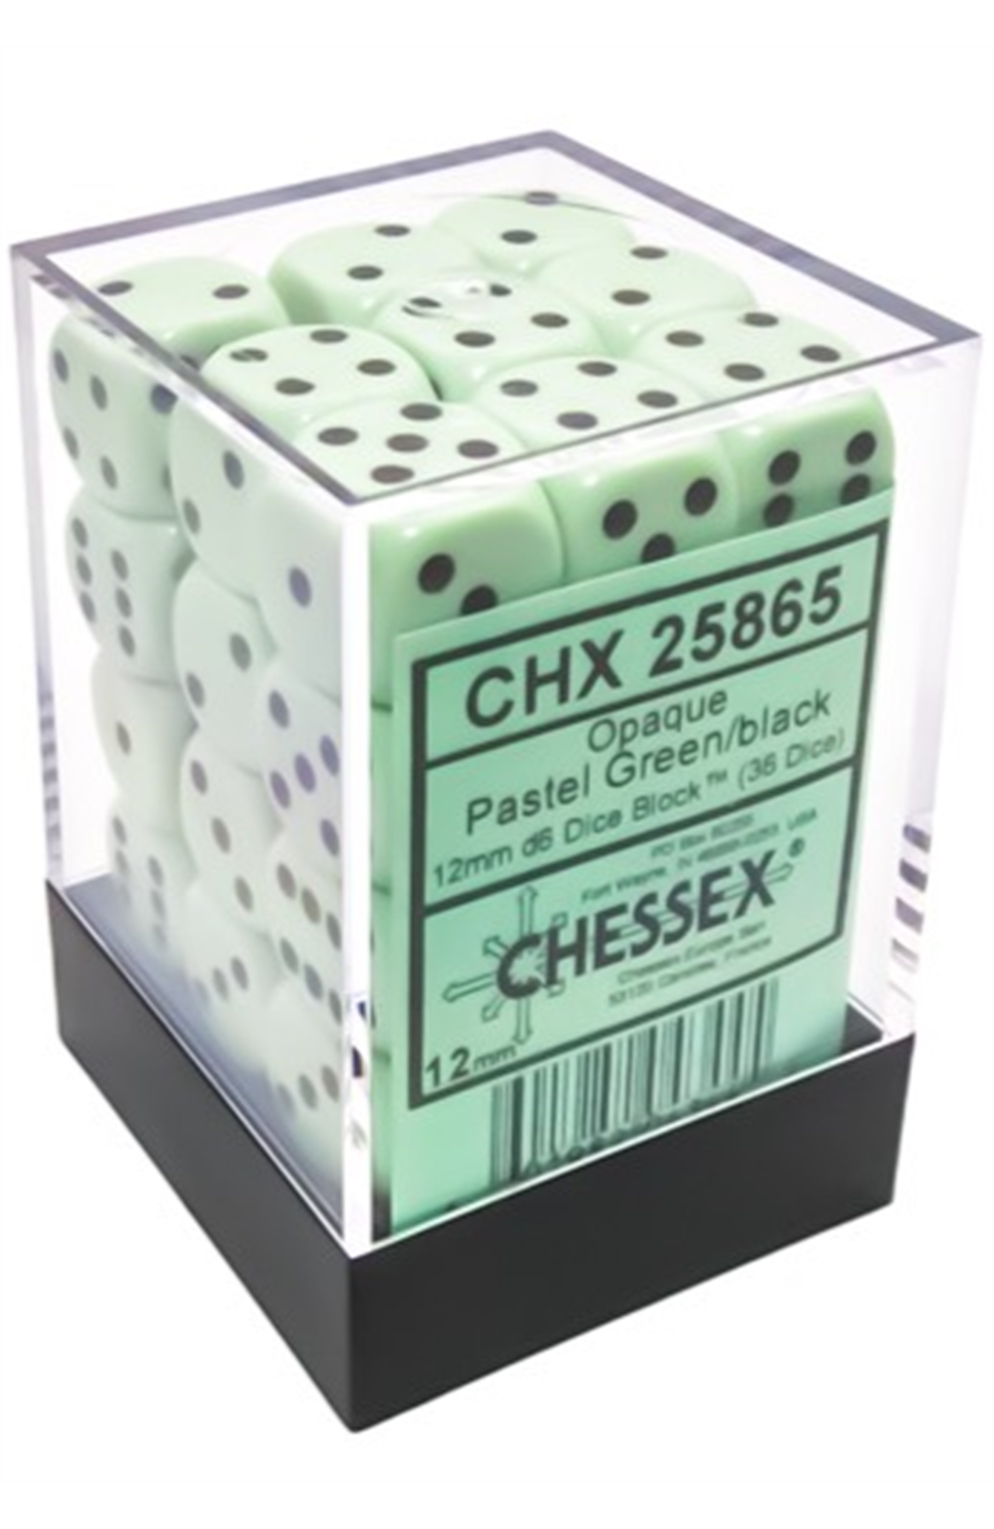 Chessex Dice Opaque Pastel Green D6 12Mm (36)